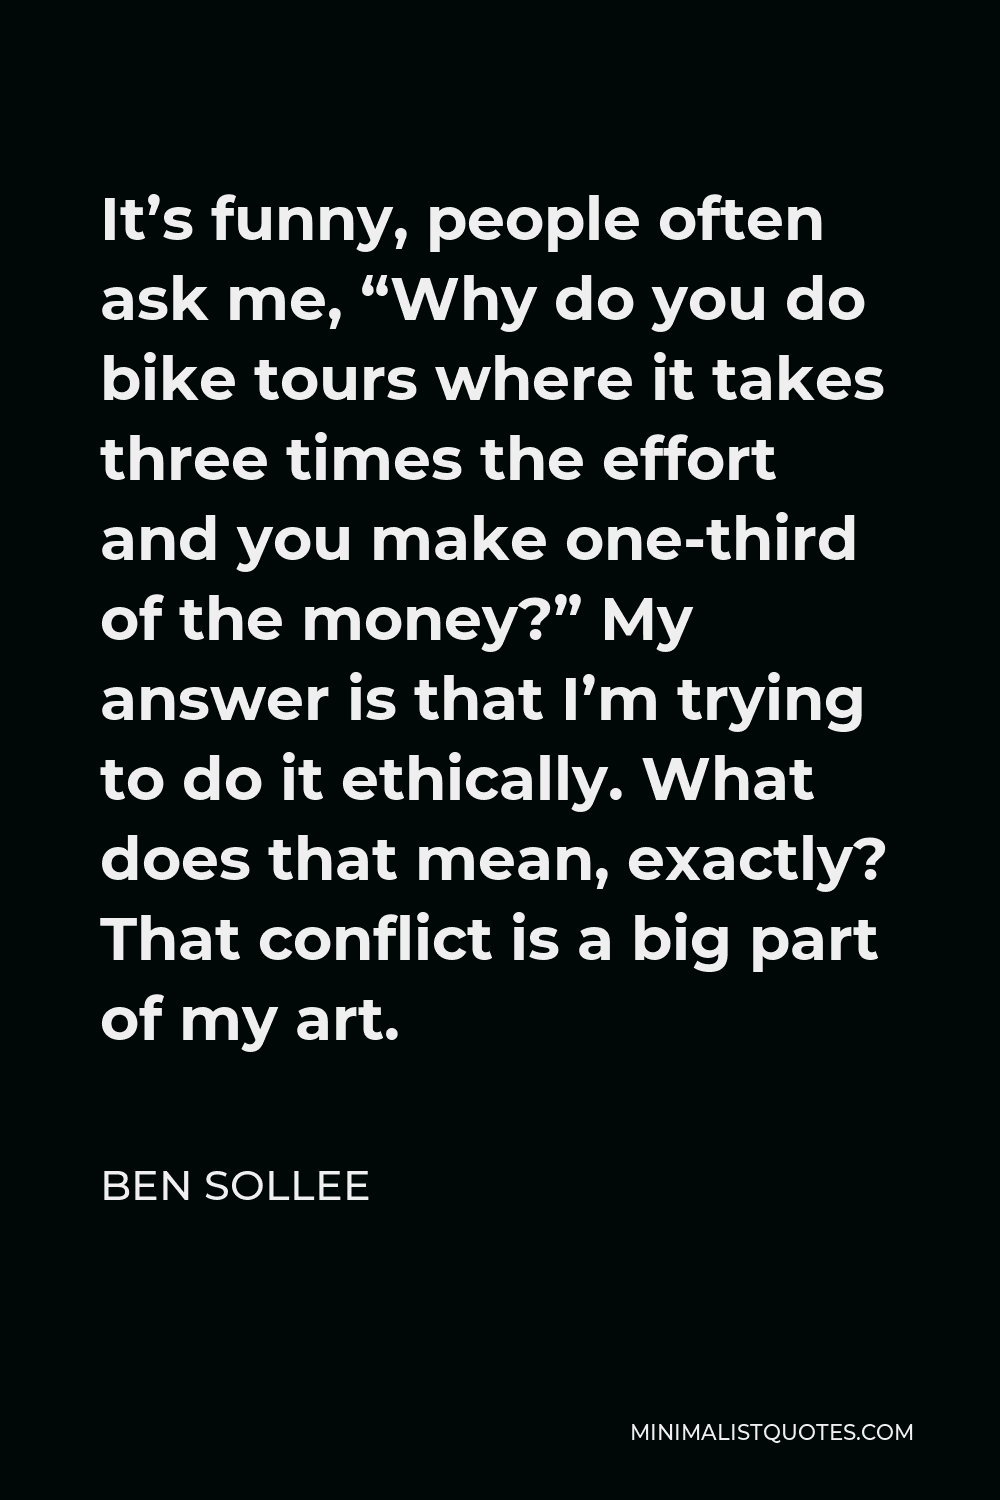 Ben Sollee Quote - It’s funny, people often ask me, “Why do you do bike tours where it takes three times the effort and you make one-third of the money?” My answer is that I’m trying to do it ethically. What does that mean, exactly? That conflict is a big part of my art.